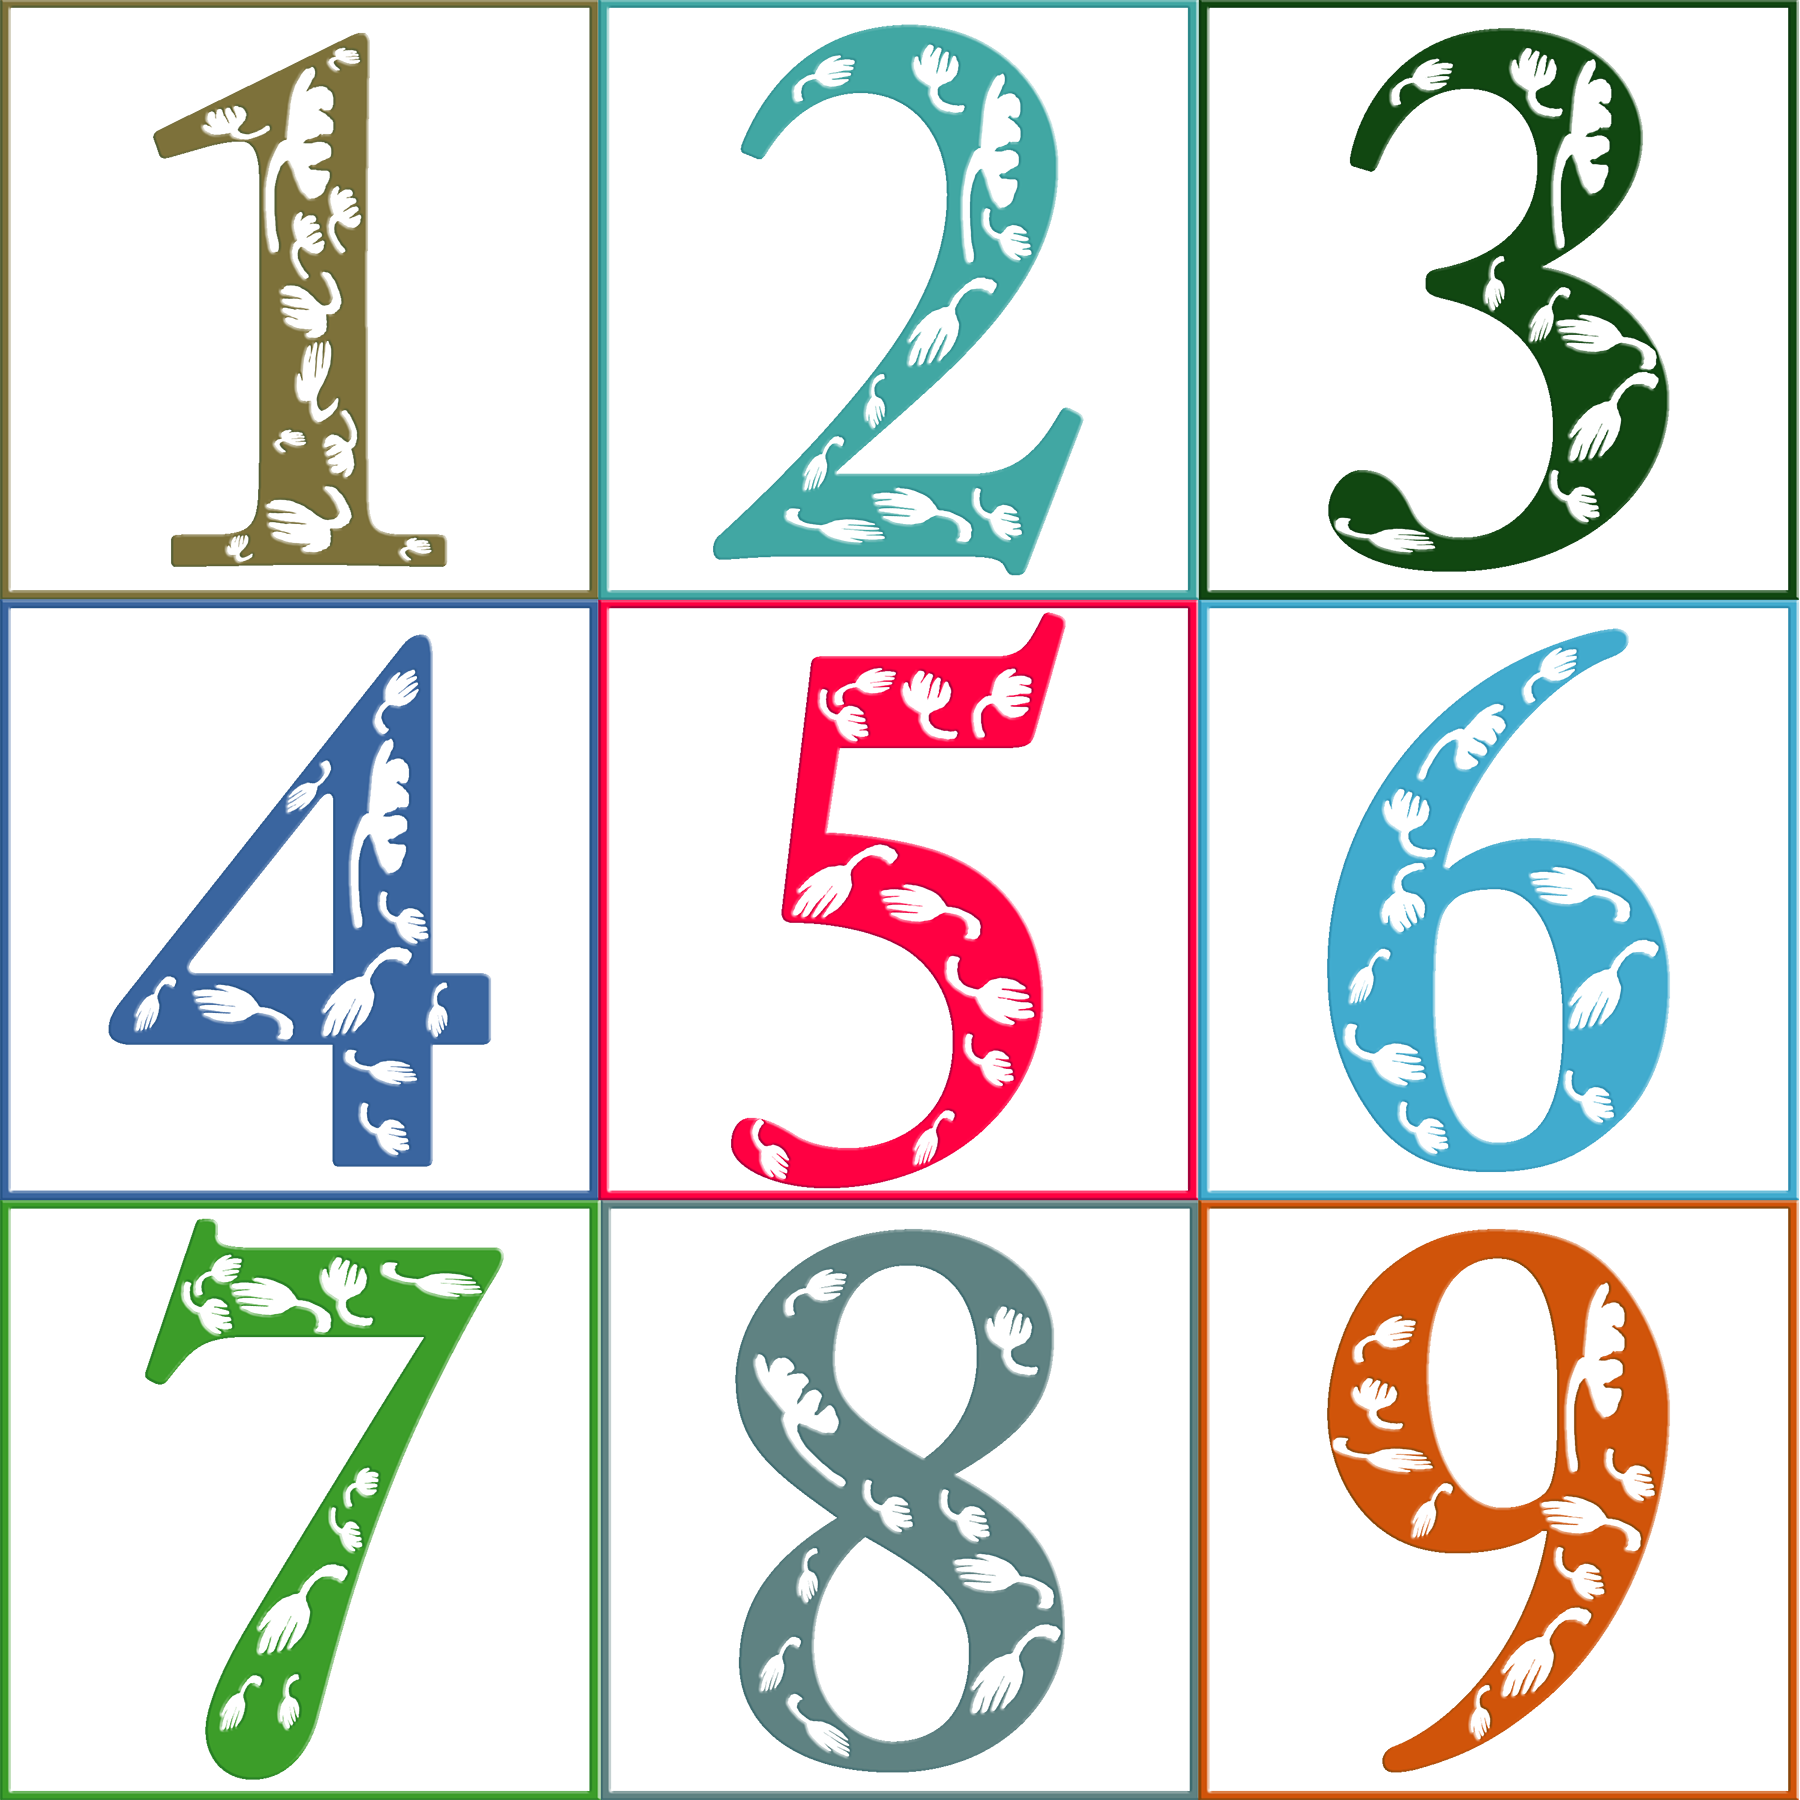 Numerology | Numerological numbers